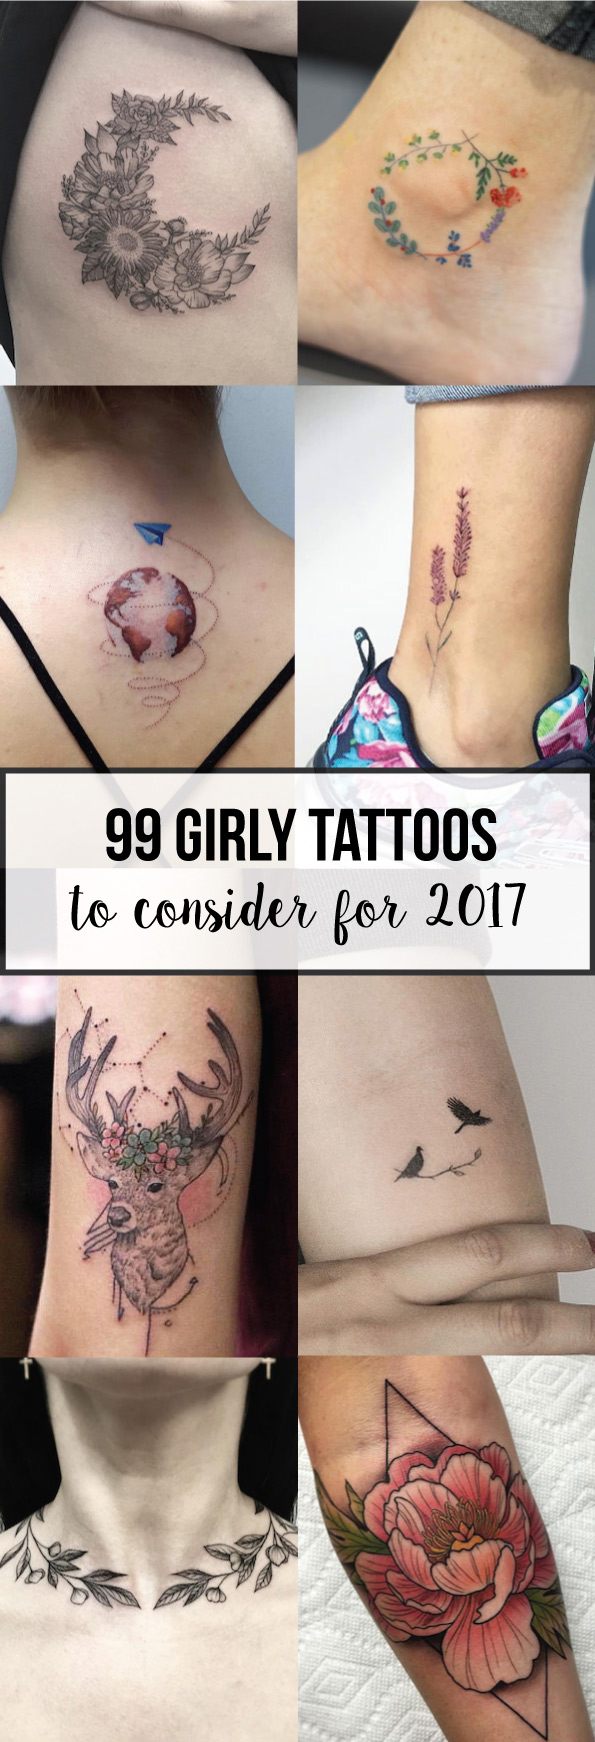 99 Girly Tattoos to Consider for 2017 | TattooBlend